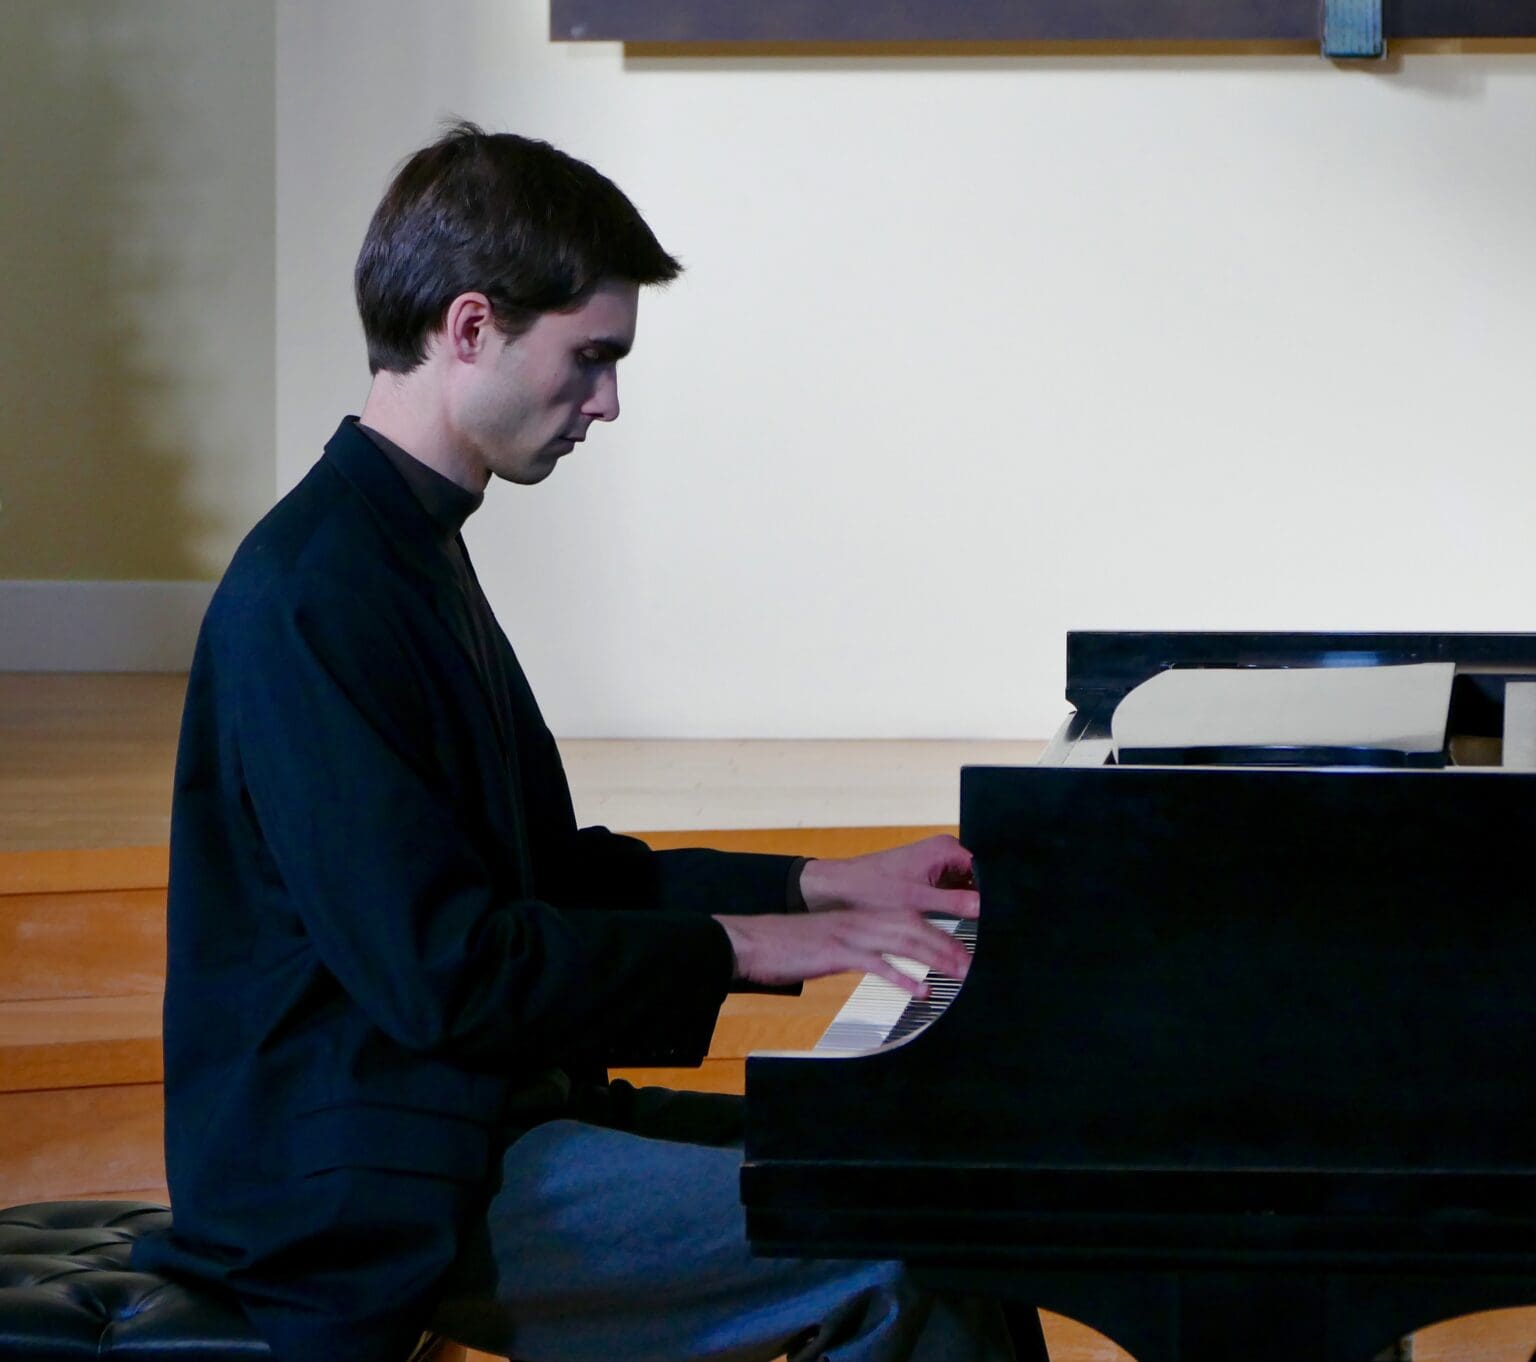 Bellingham native Cole Anderson, a prodigious pianist plays a tune on a grand piano.